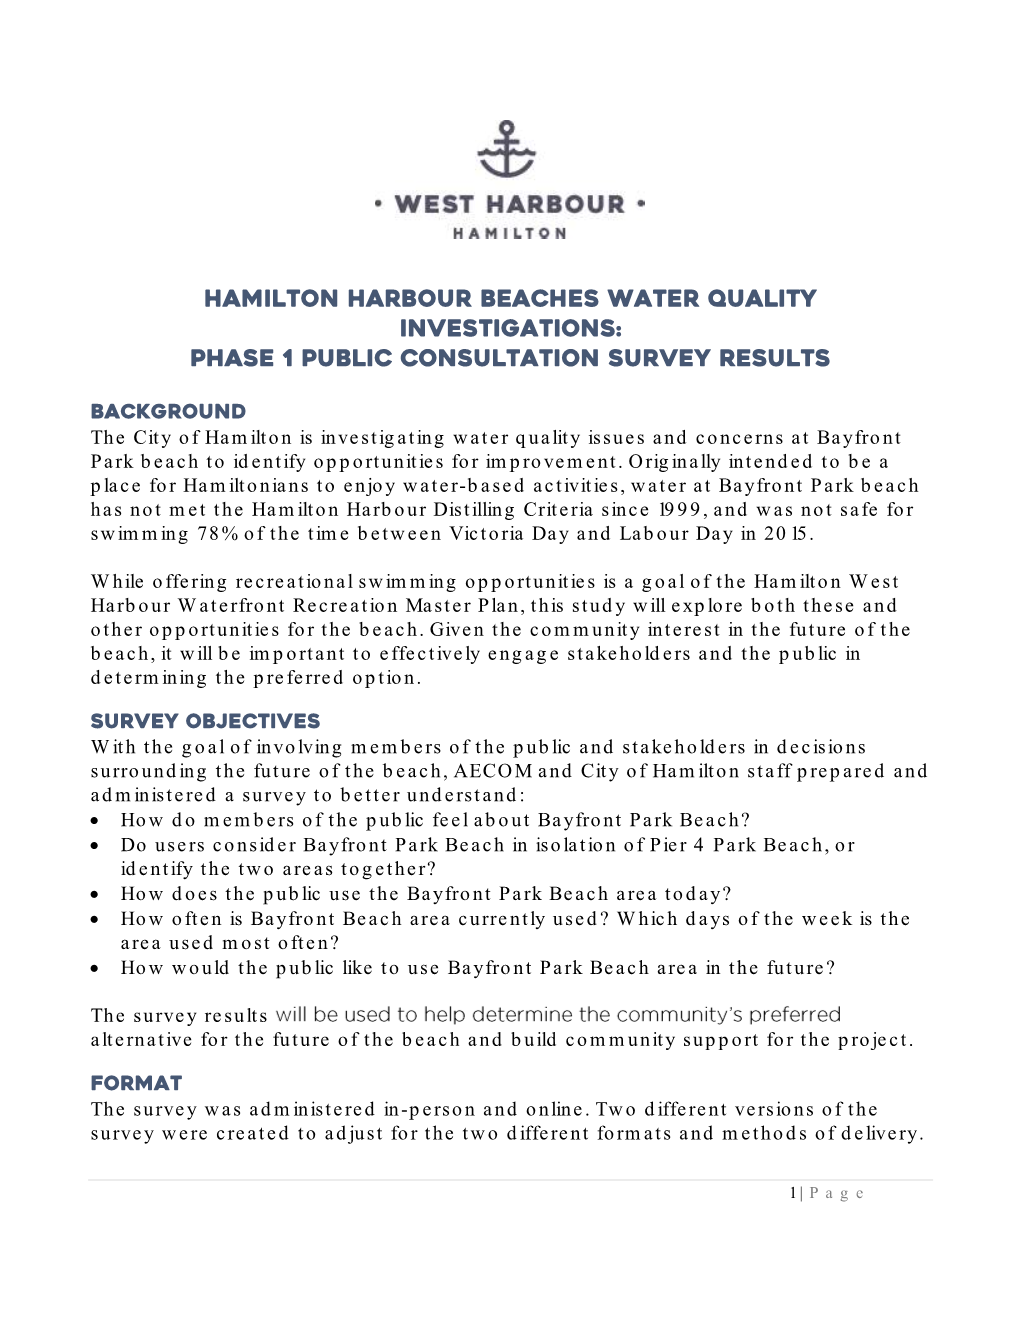 Hamilton Harbour Beaches Water Quality Investigations: Phase 1 Public Consultation Survey Results